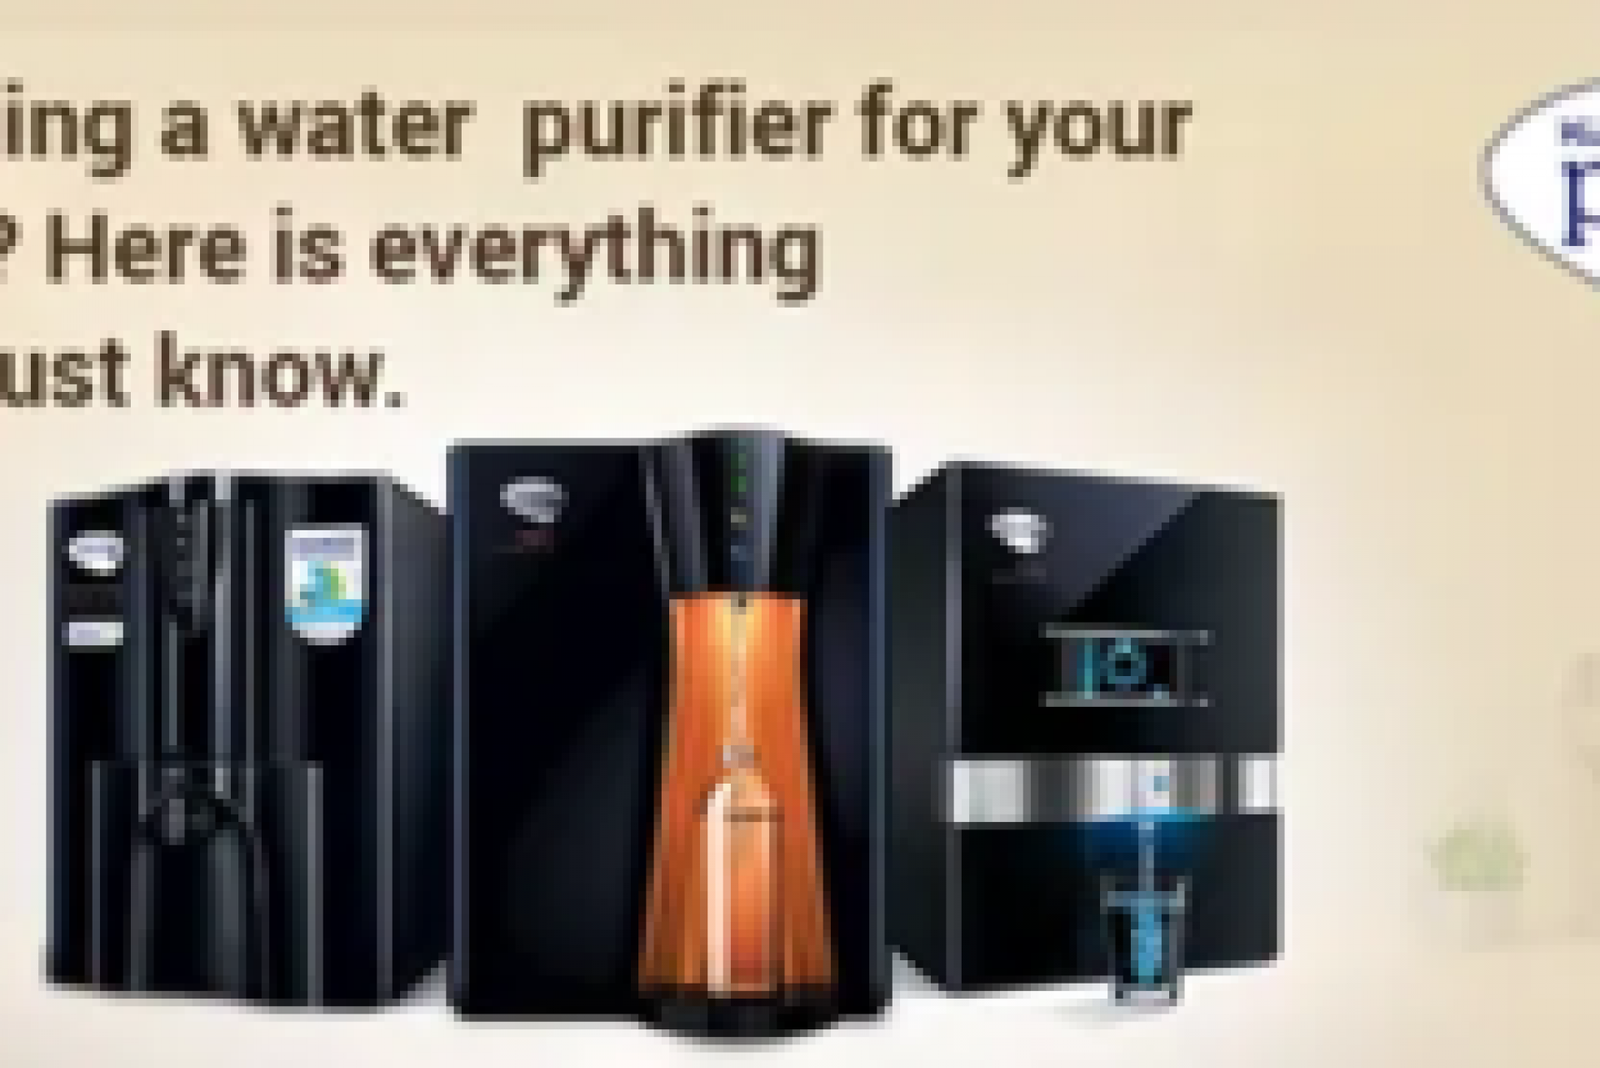 Selecting a water purifier for your home